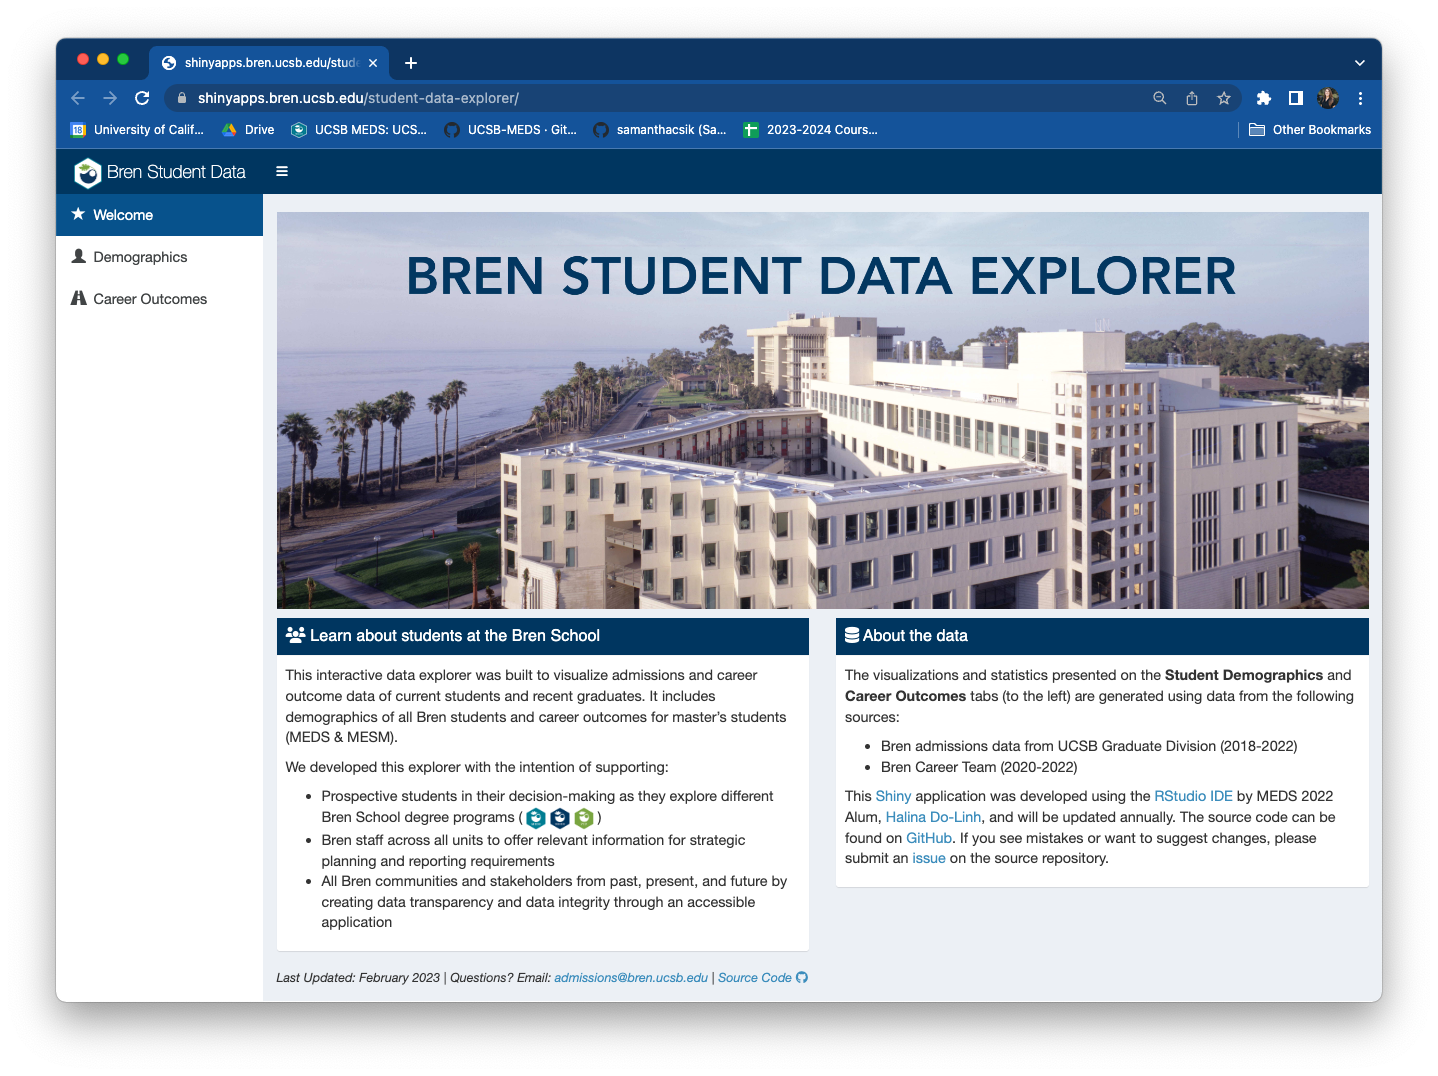 A online dashboard with a banner image depicting the Bren School building with the ocean to the left. Atop the image reads in all capital letters, 'BREN STUDENT DATA EXPLORER'. Beneath the banner image are two side-by-side boxes with text. The top of the left-hand box reads, 'Learn about students at the Bren School', and the top of the right-hand box reads, 'About the data'. A left-hand sidebar indicates that we're viewing the Welcome page. Two other pages are listed below: Demographics and Career Outcomes.